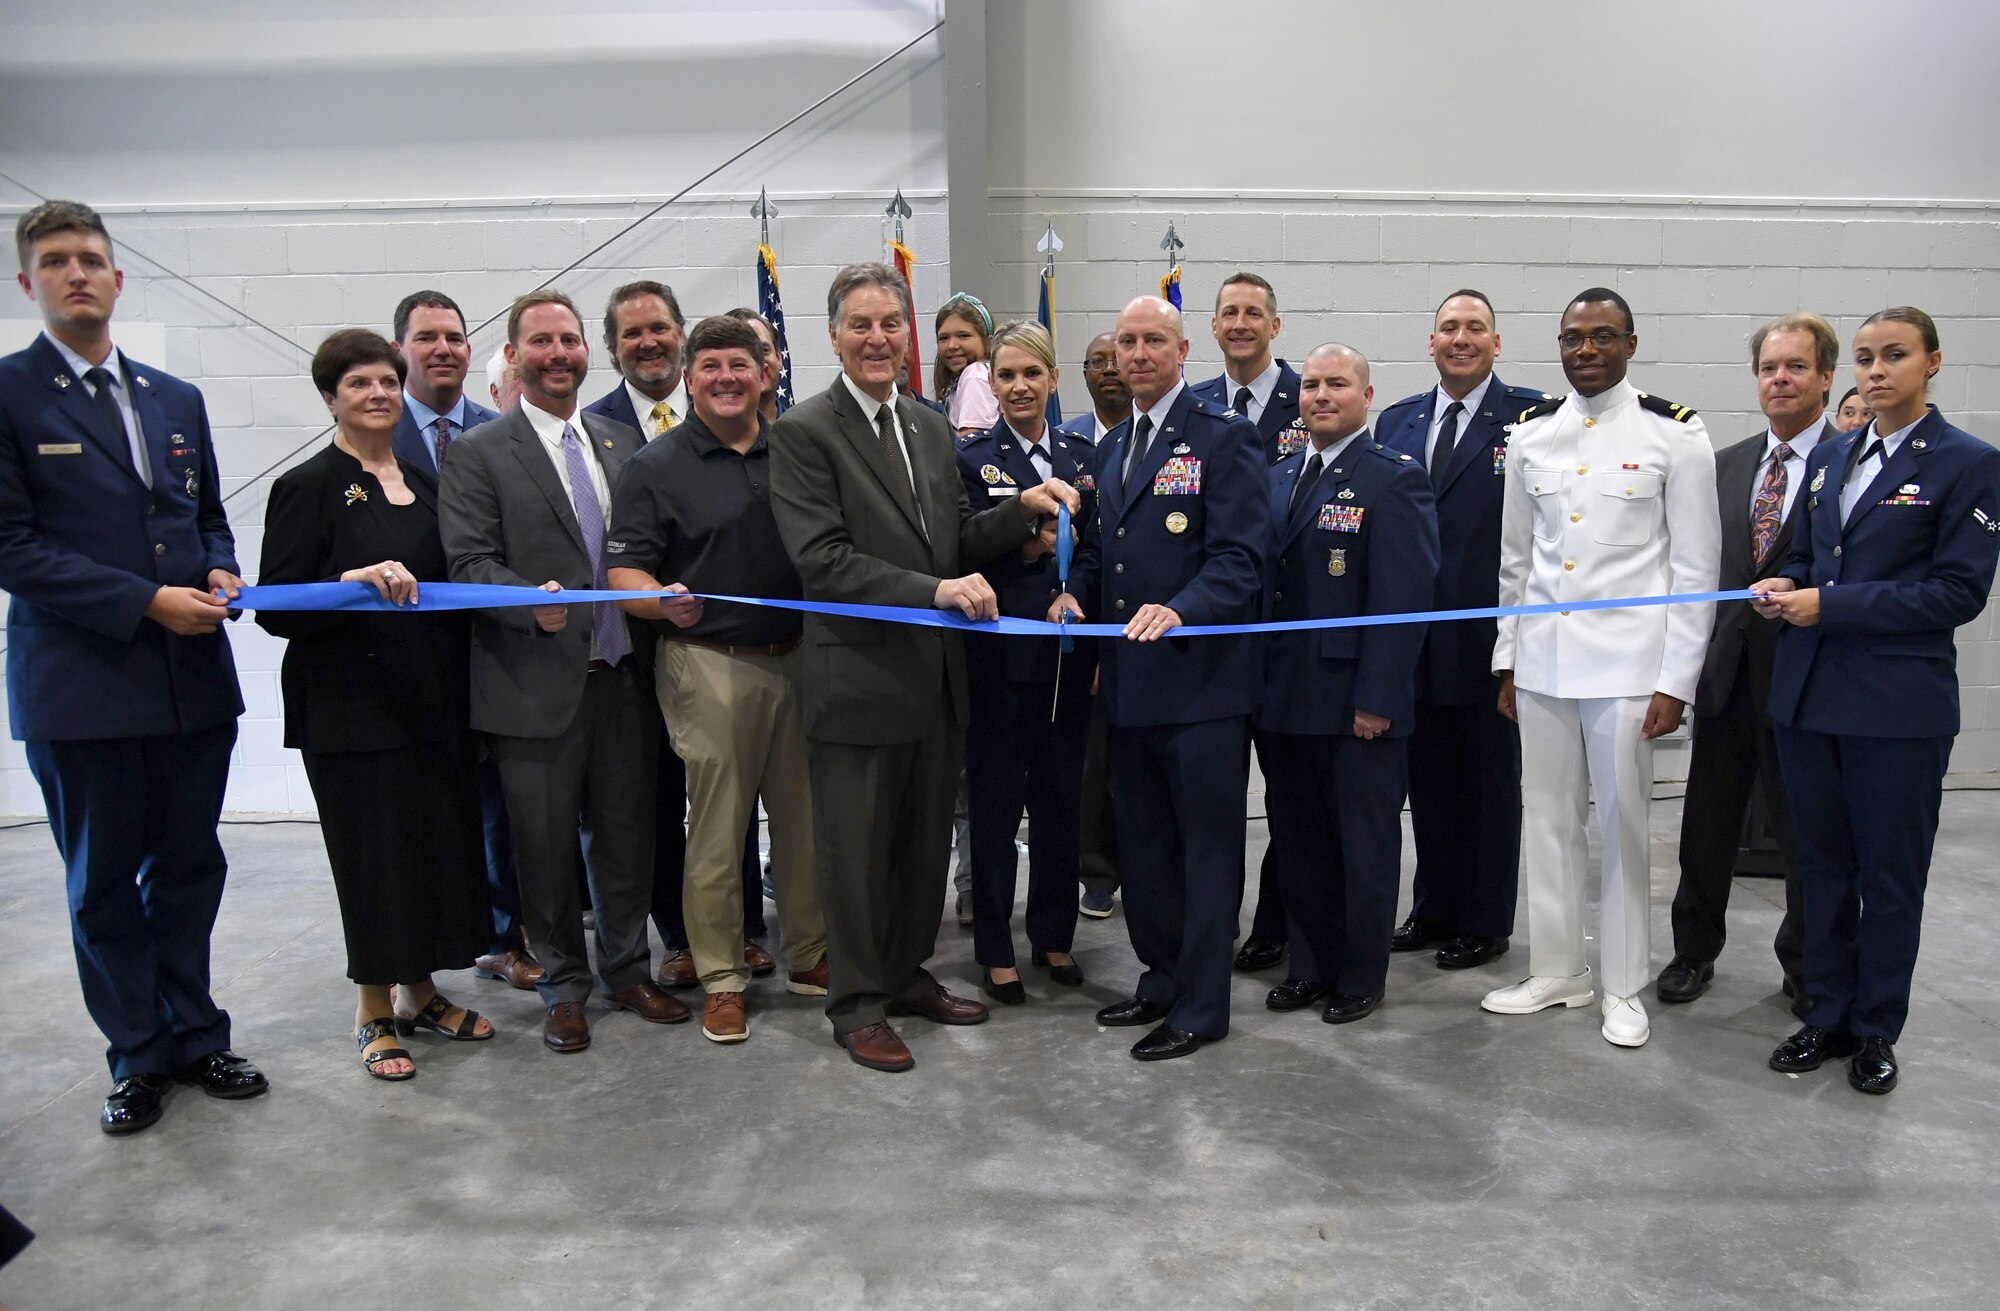 Keesler leadership and Mississippi state and local government officials, pose for a photo during the Division Street Gate Ribbon Cutting Ceremony inside the Commercial Vehicle Inspection Building at Keesler Air Force Base, Mississippi, May 26, 2022. After approximately two years of construction, Keesler's new main gate marks the completion of a multi-sourced and multi-funded project which will enhance force protection and anti-terrorism measures. Keesler partnered with the city of Biloxi, along with state and federal planners, to align the primary entrance at Division Street. (U.S. Air Force photo by Kemberly Groue)